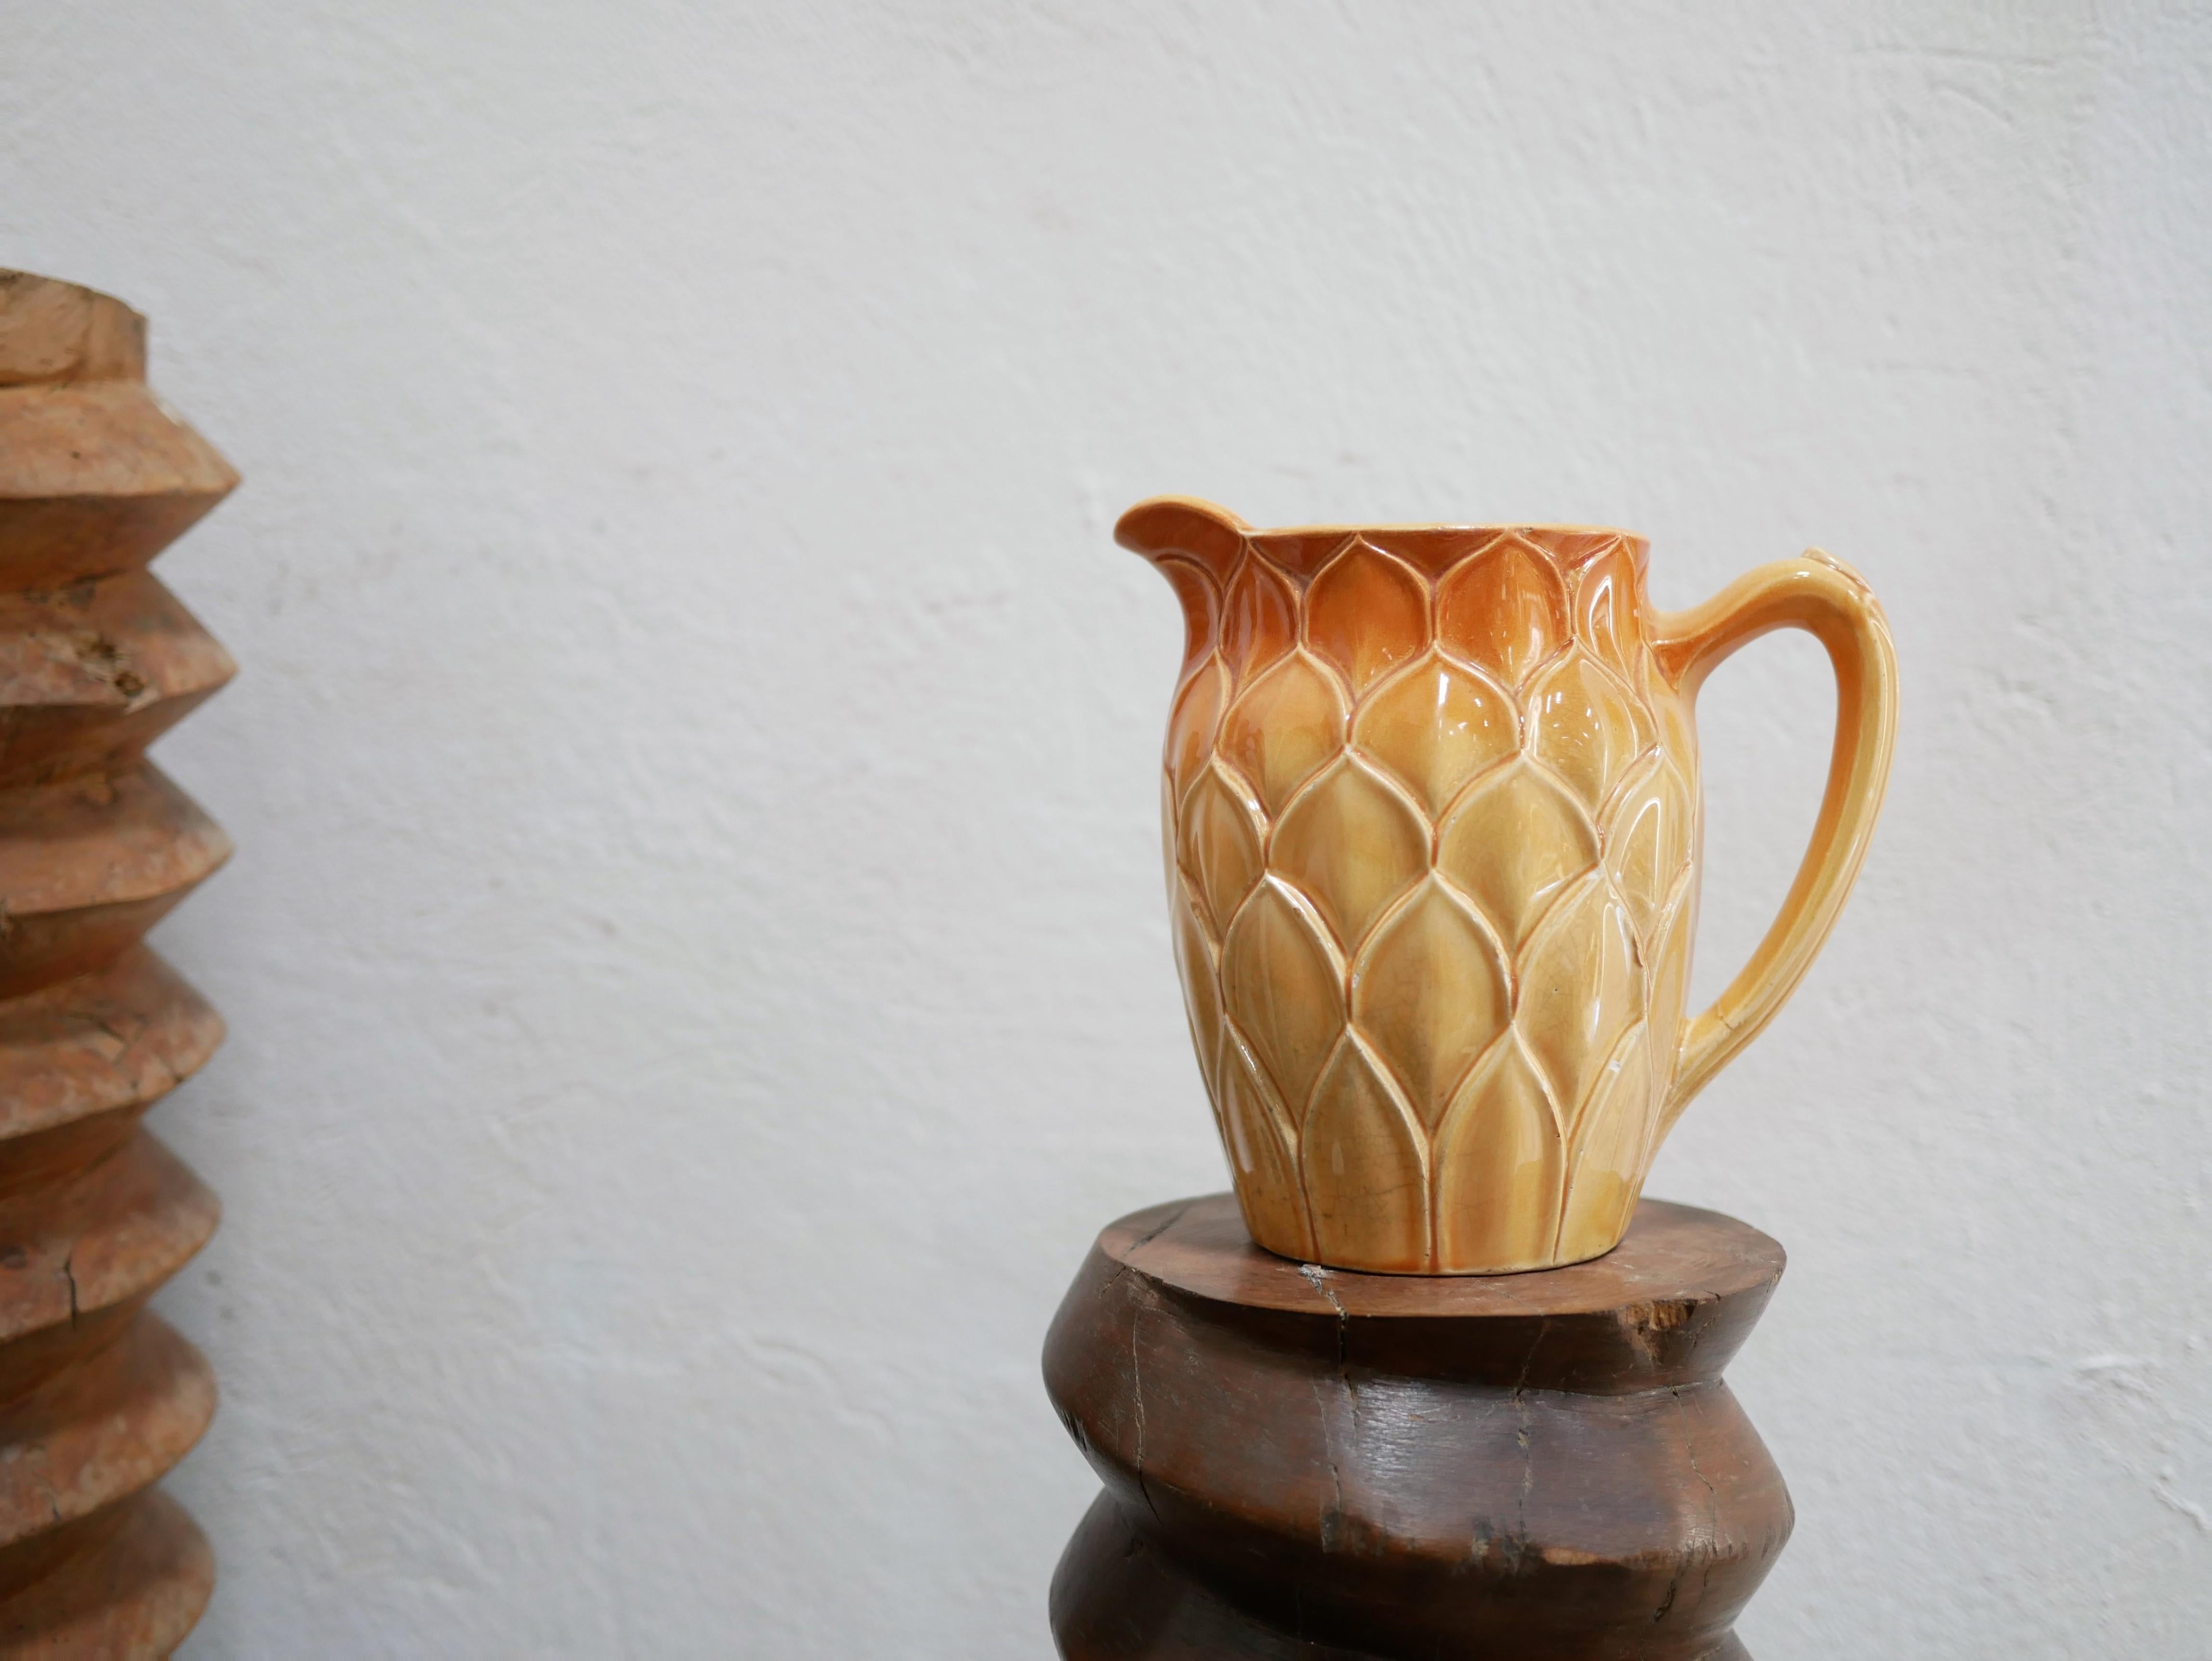 French Vintage Ceramic Pitcher by the Saint Clément Factory, France